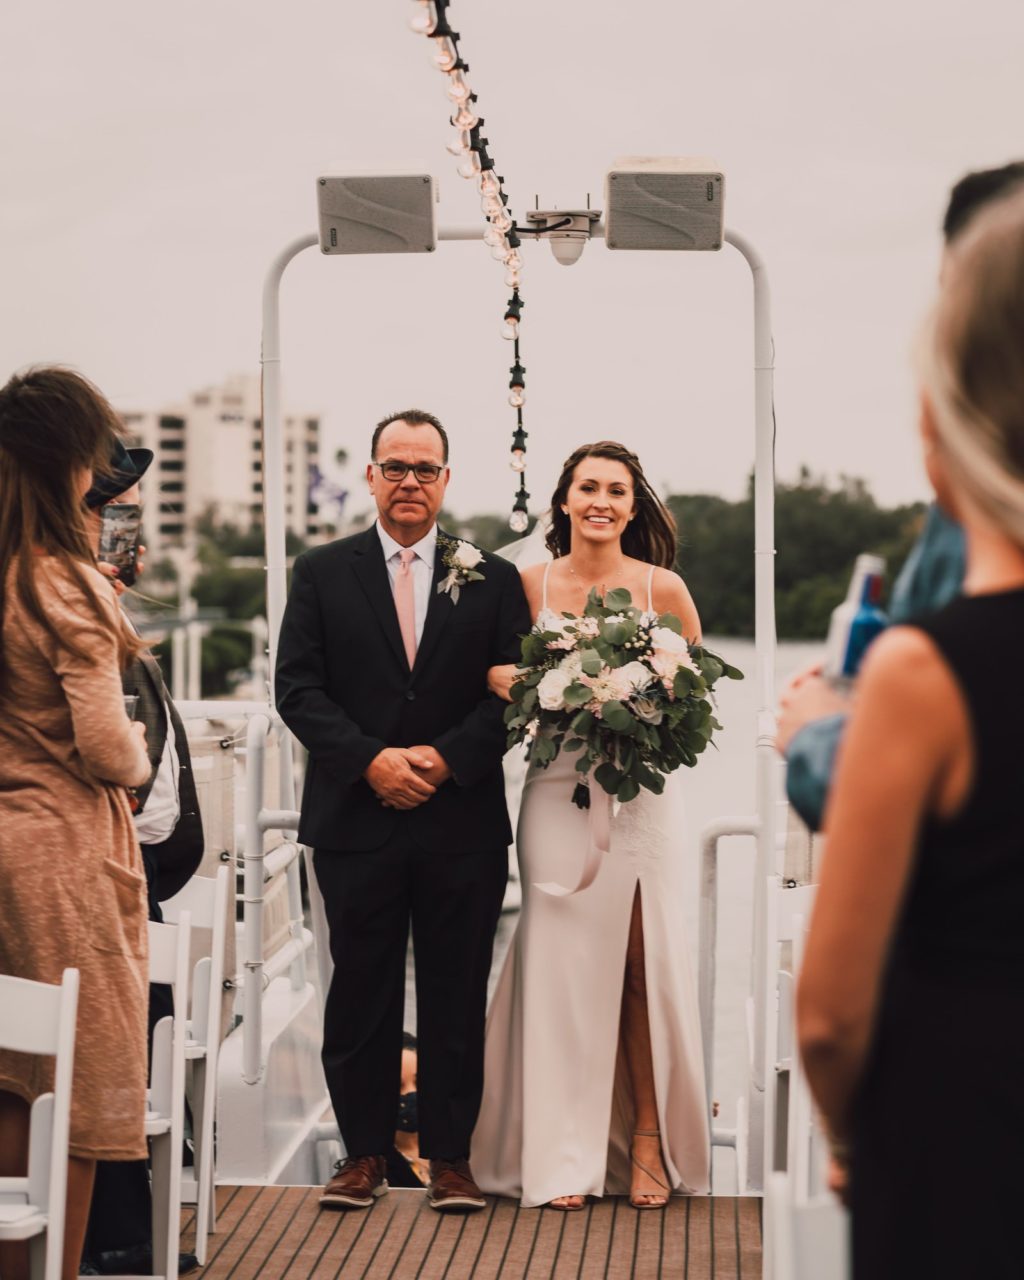 Minimalistic Bride Walking Down the Wedding Ceremony Aisle Processional with Father Holding Wild Eucalyptus Greenery and White Floral Bouquet | Tampa Bay Wedding Photographer and Videographer Bonnie Newman Creative | Wedding Hair and Makeup Femme Akoi Beauty Studio | Unique Waterfront Wedding Venue Yacht StarShip